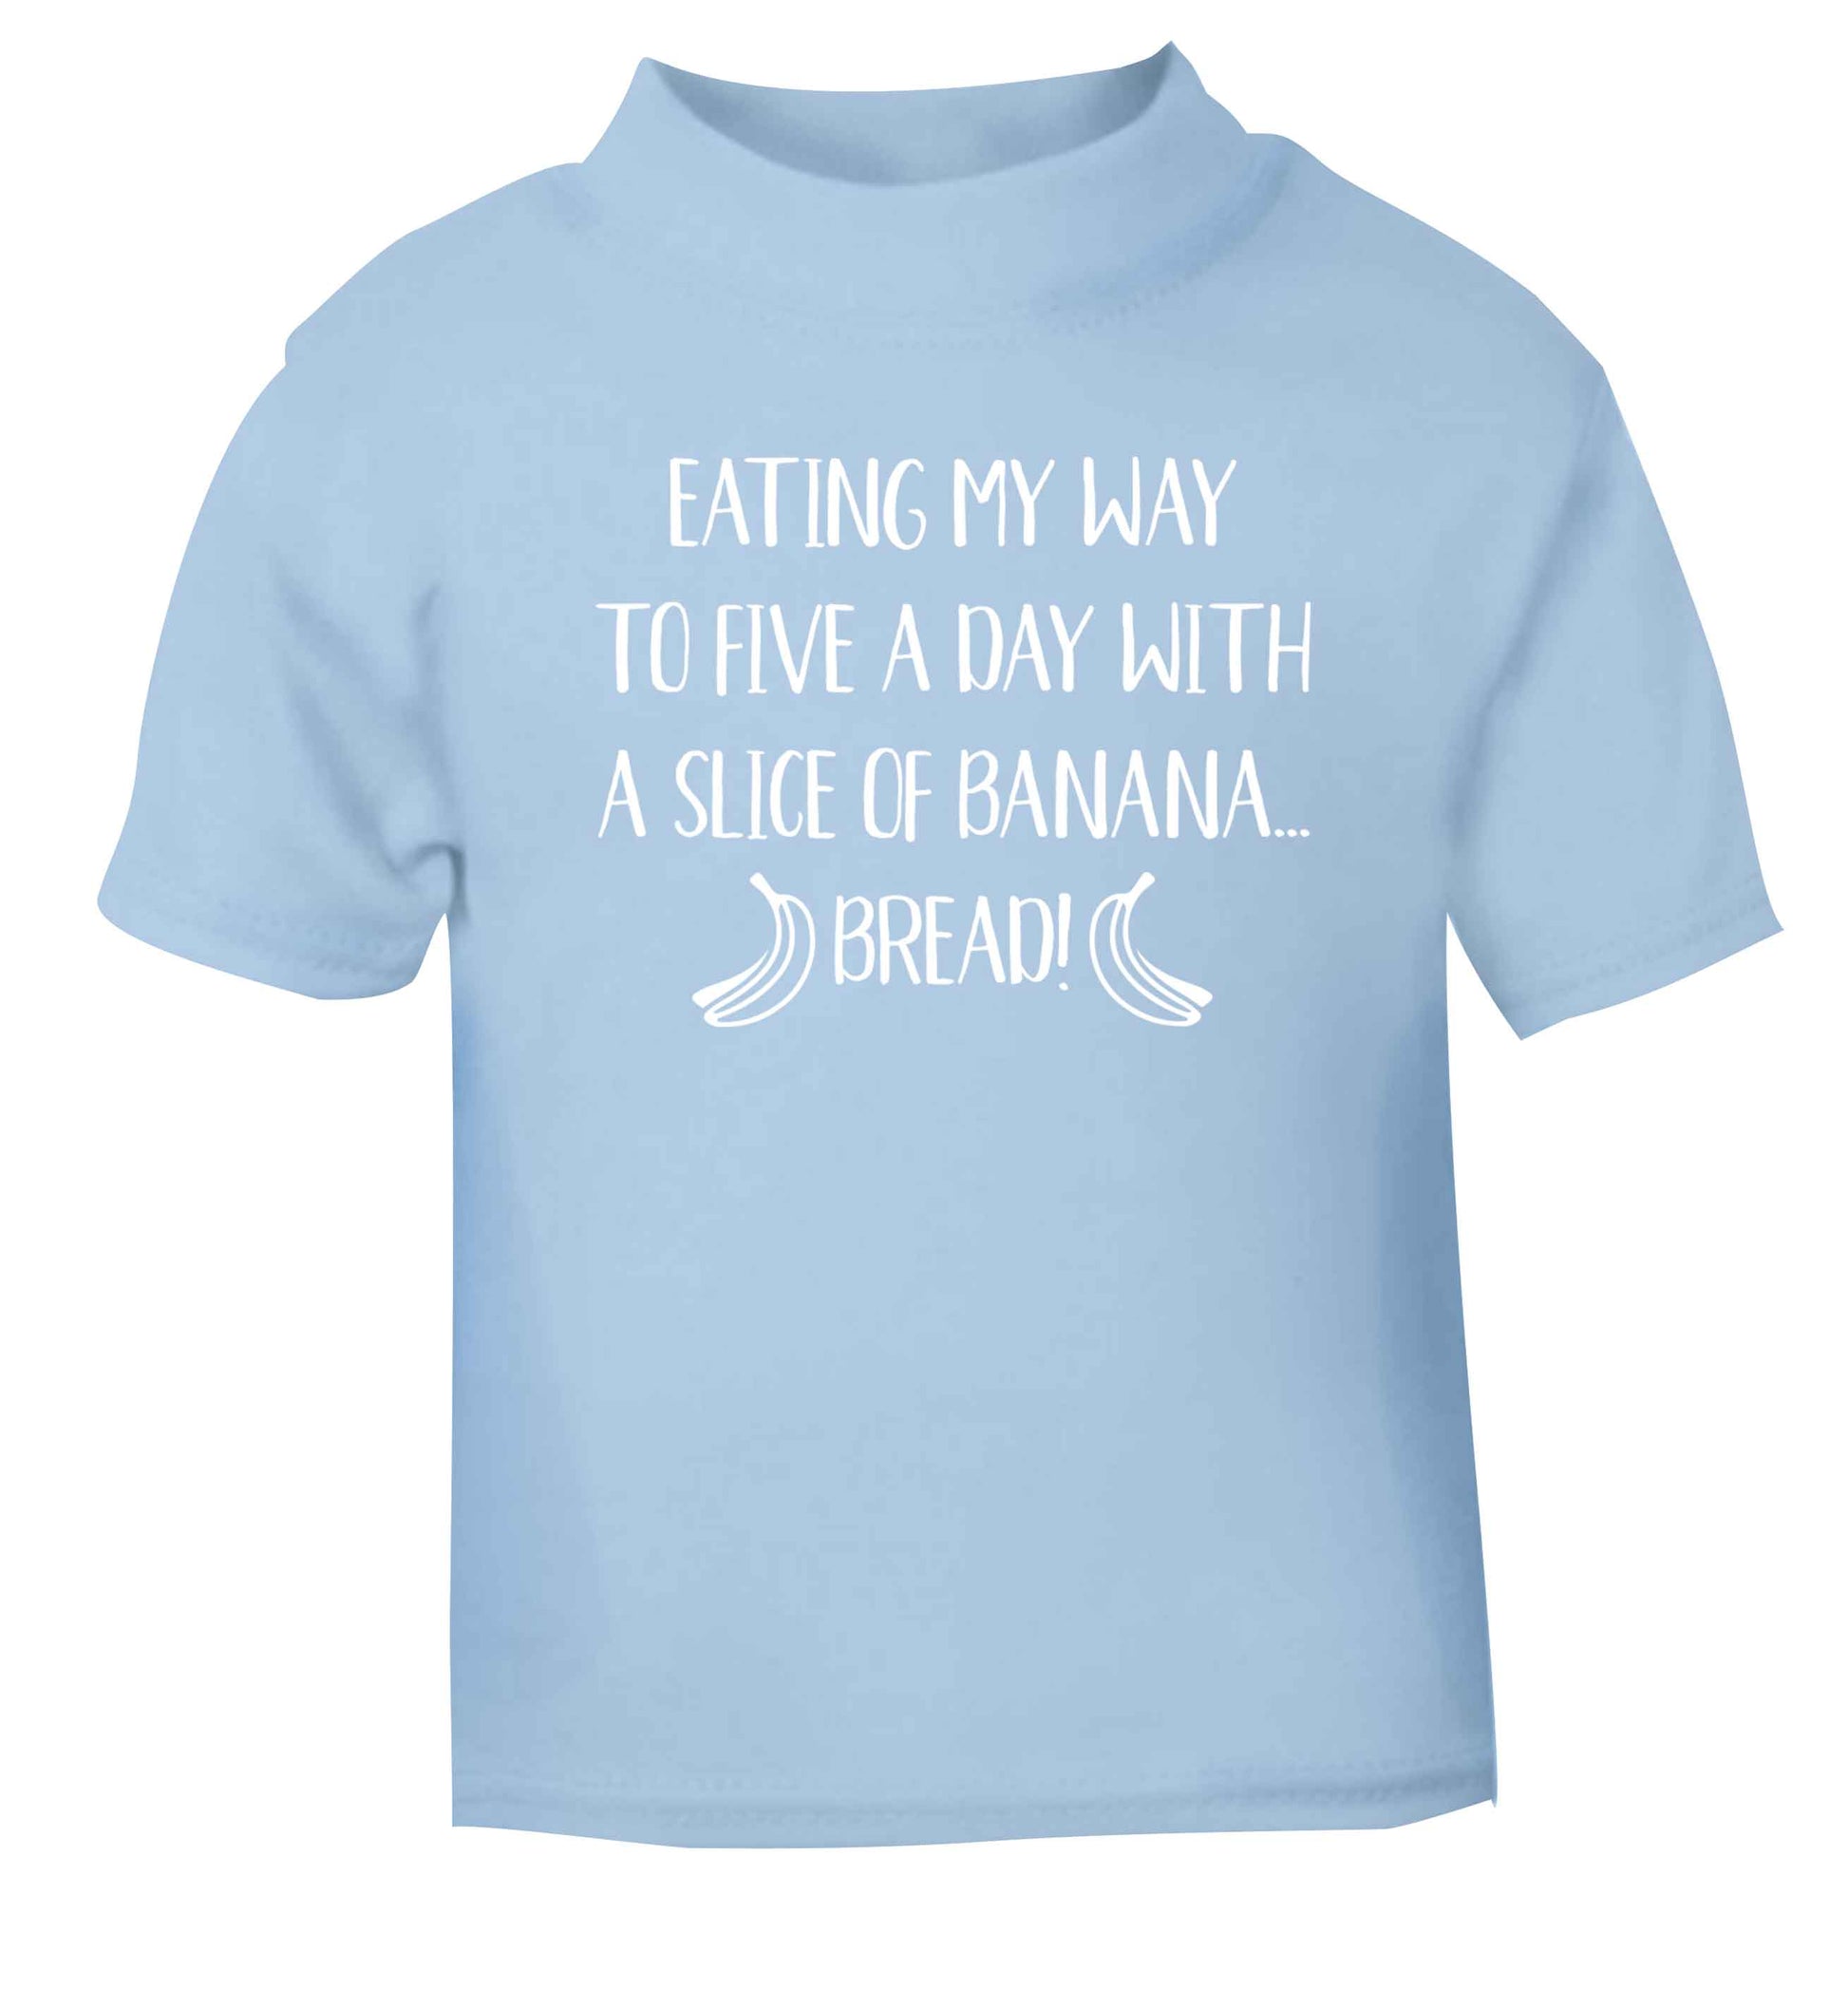 Eating my way to five a day with a slice of banana bread light blue Baby Toddler Tshirt 2 Years